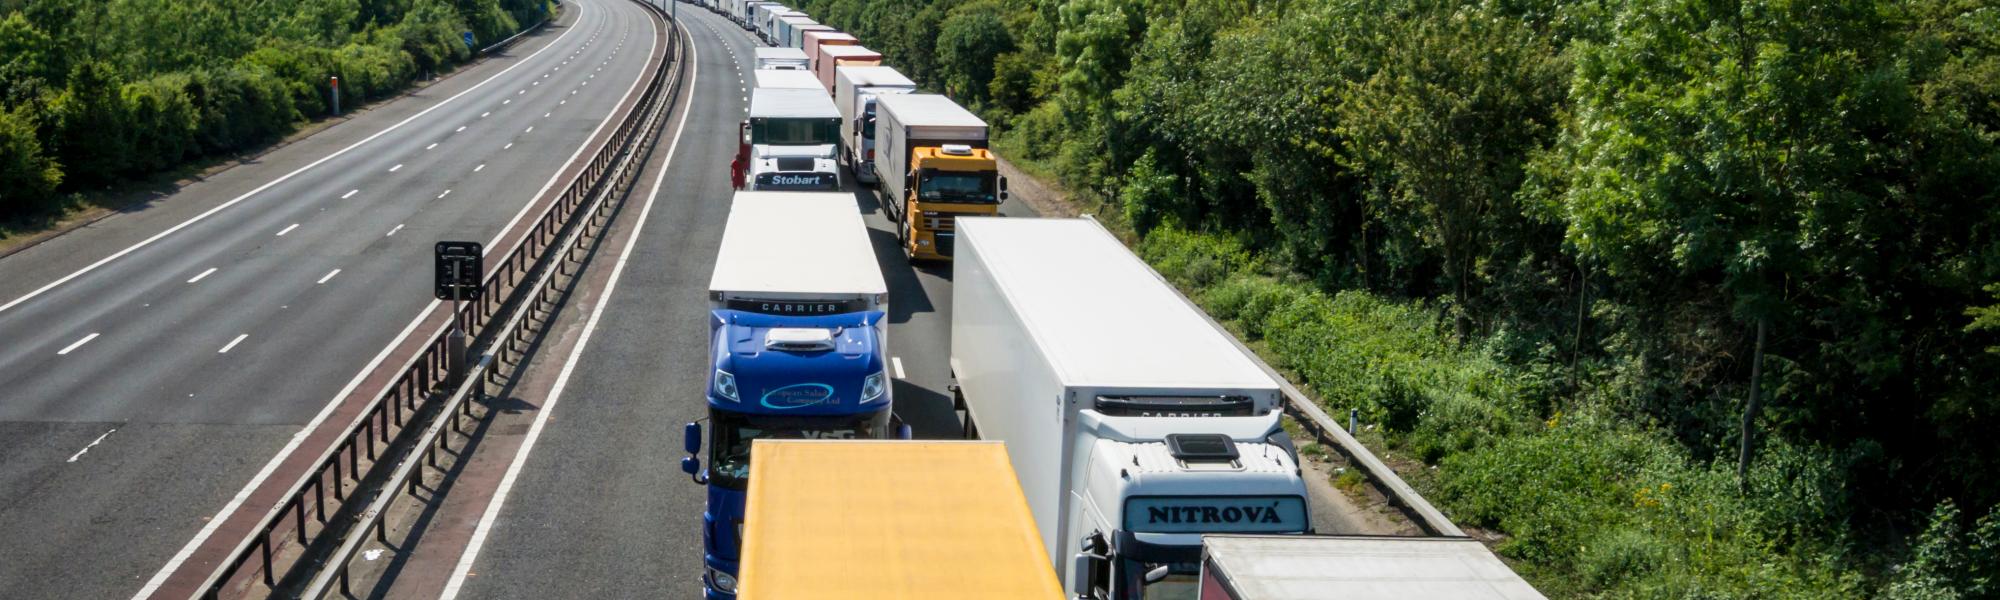 queues of trucks on a highway